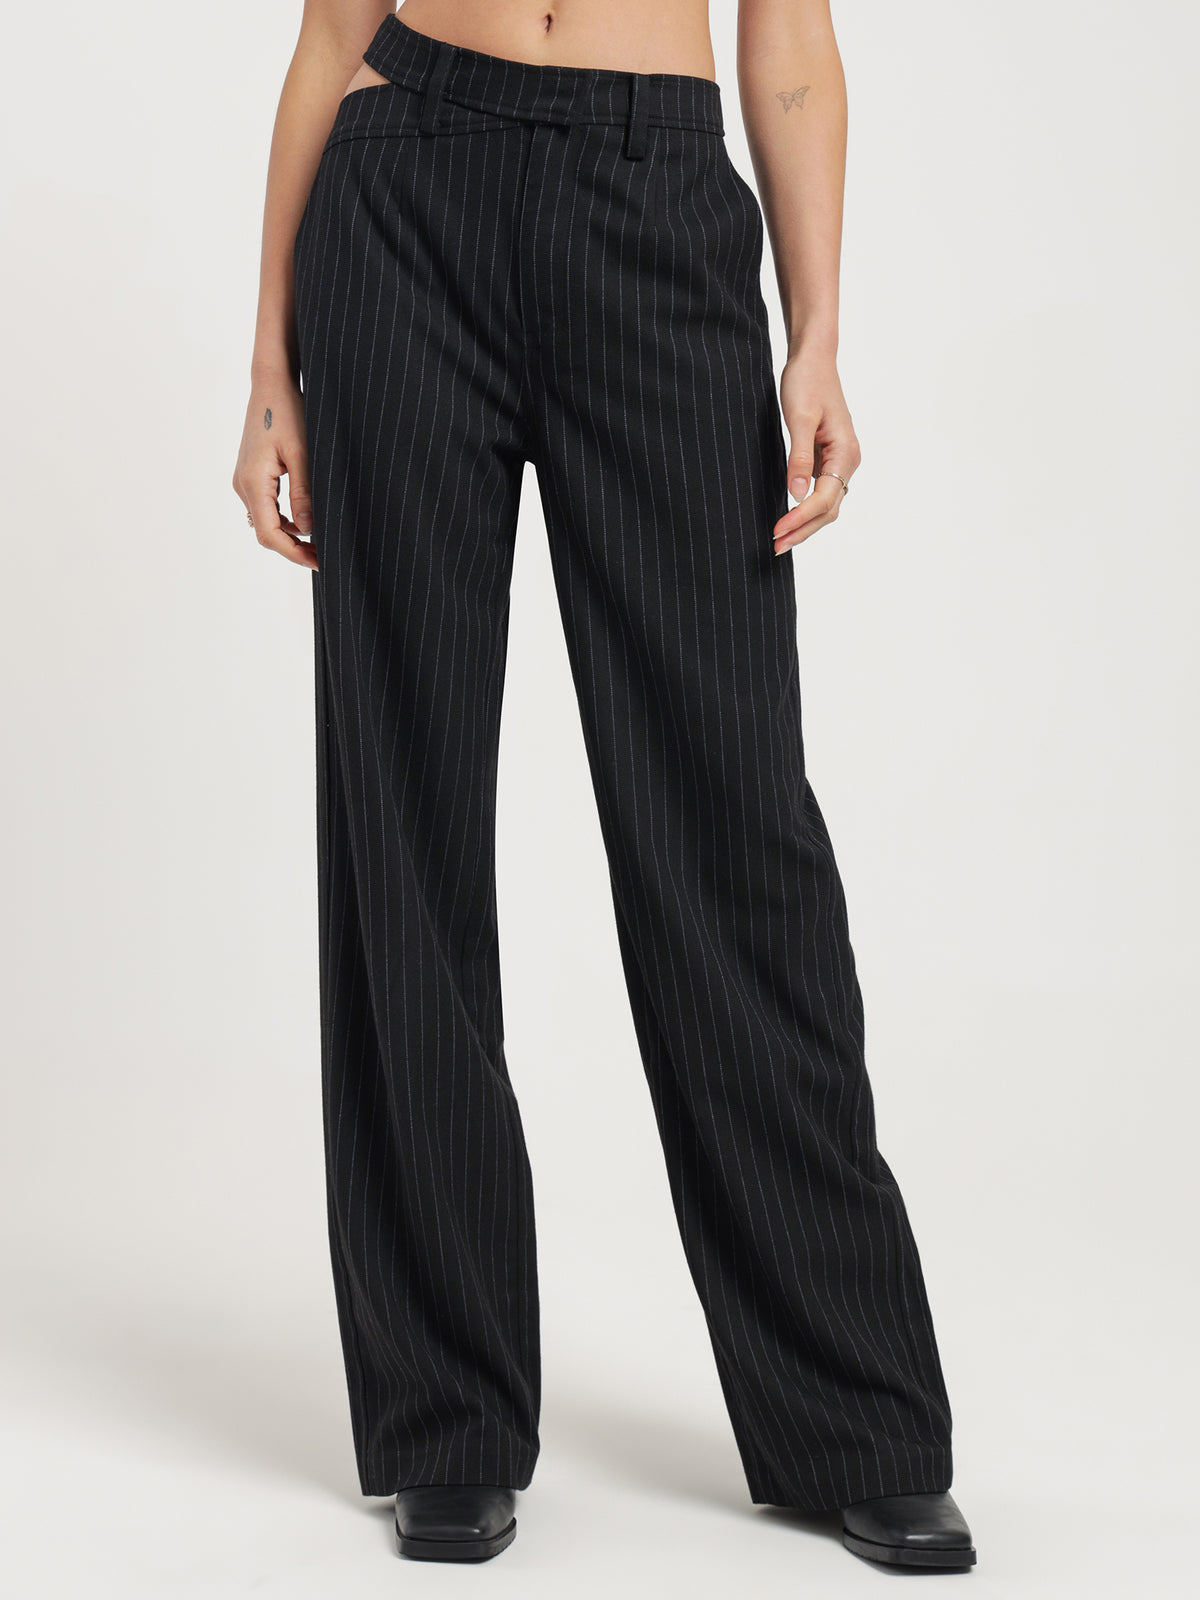 Detached Trousers in Black Pinstripe